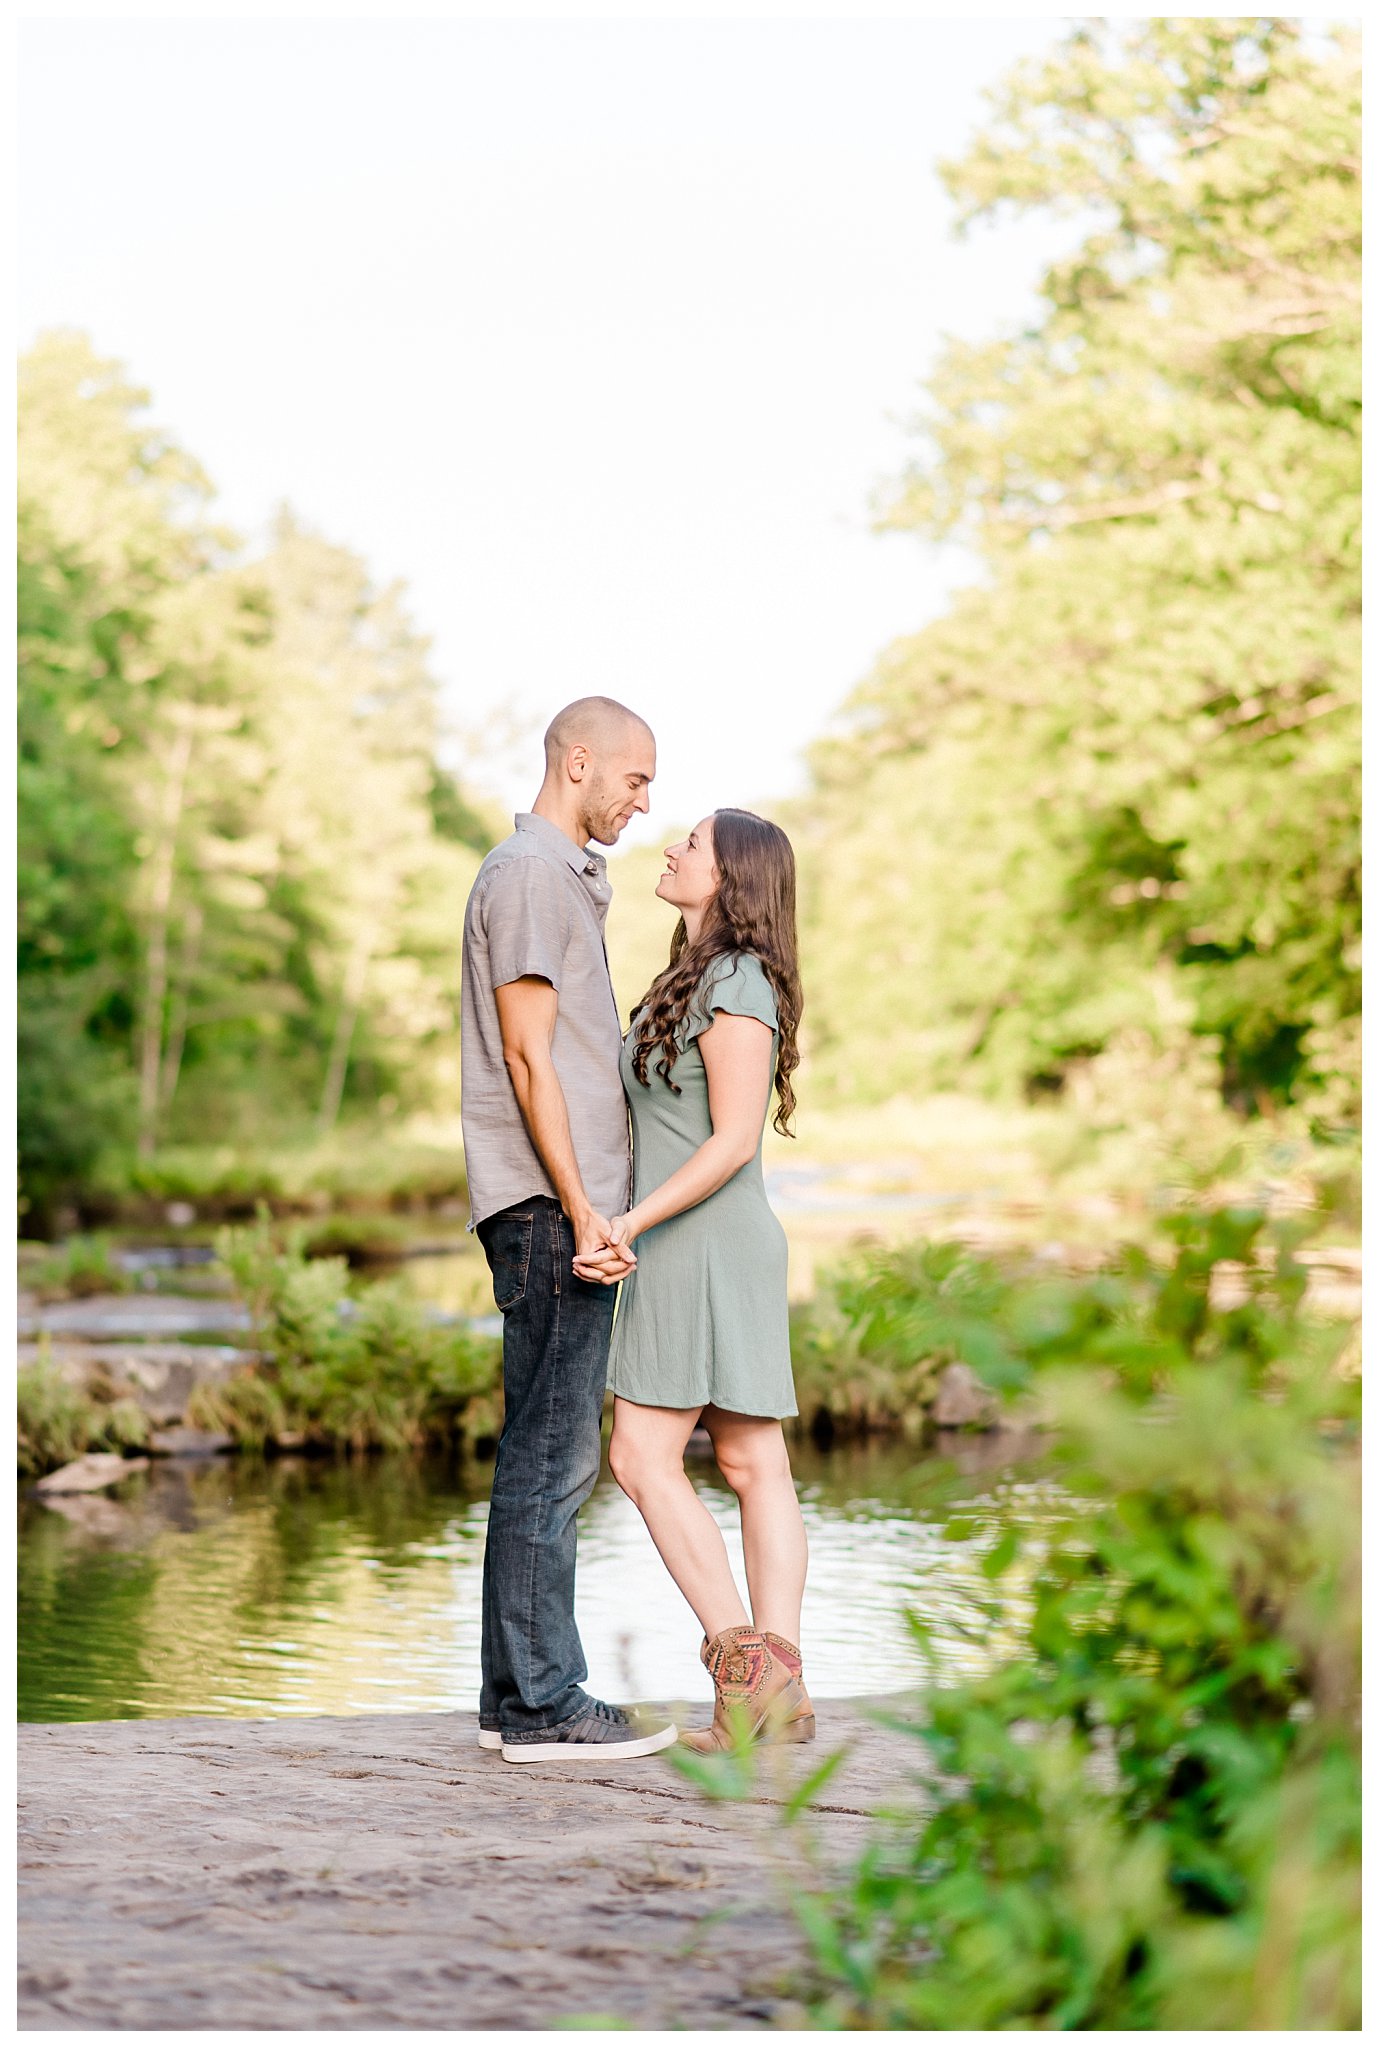 Salmon River Falls Engagement Session Joanna Young Photography_0023.jpg